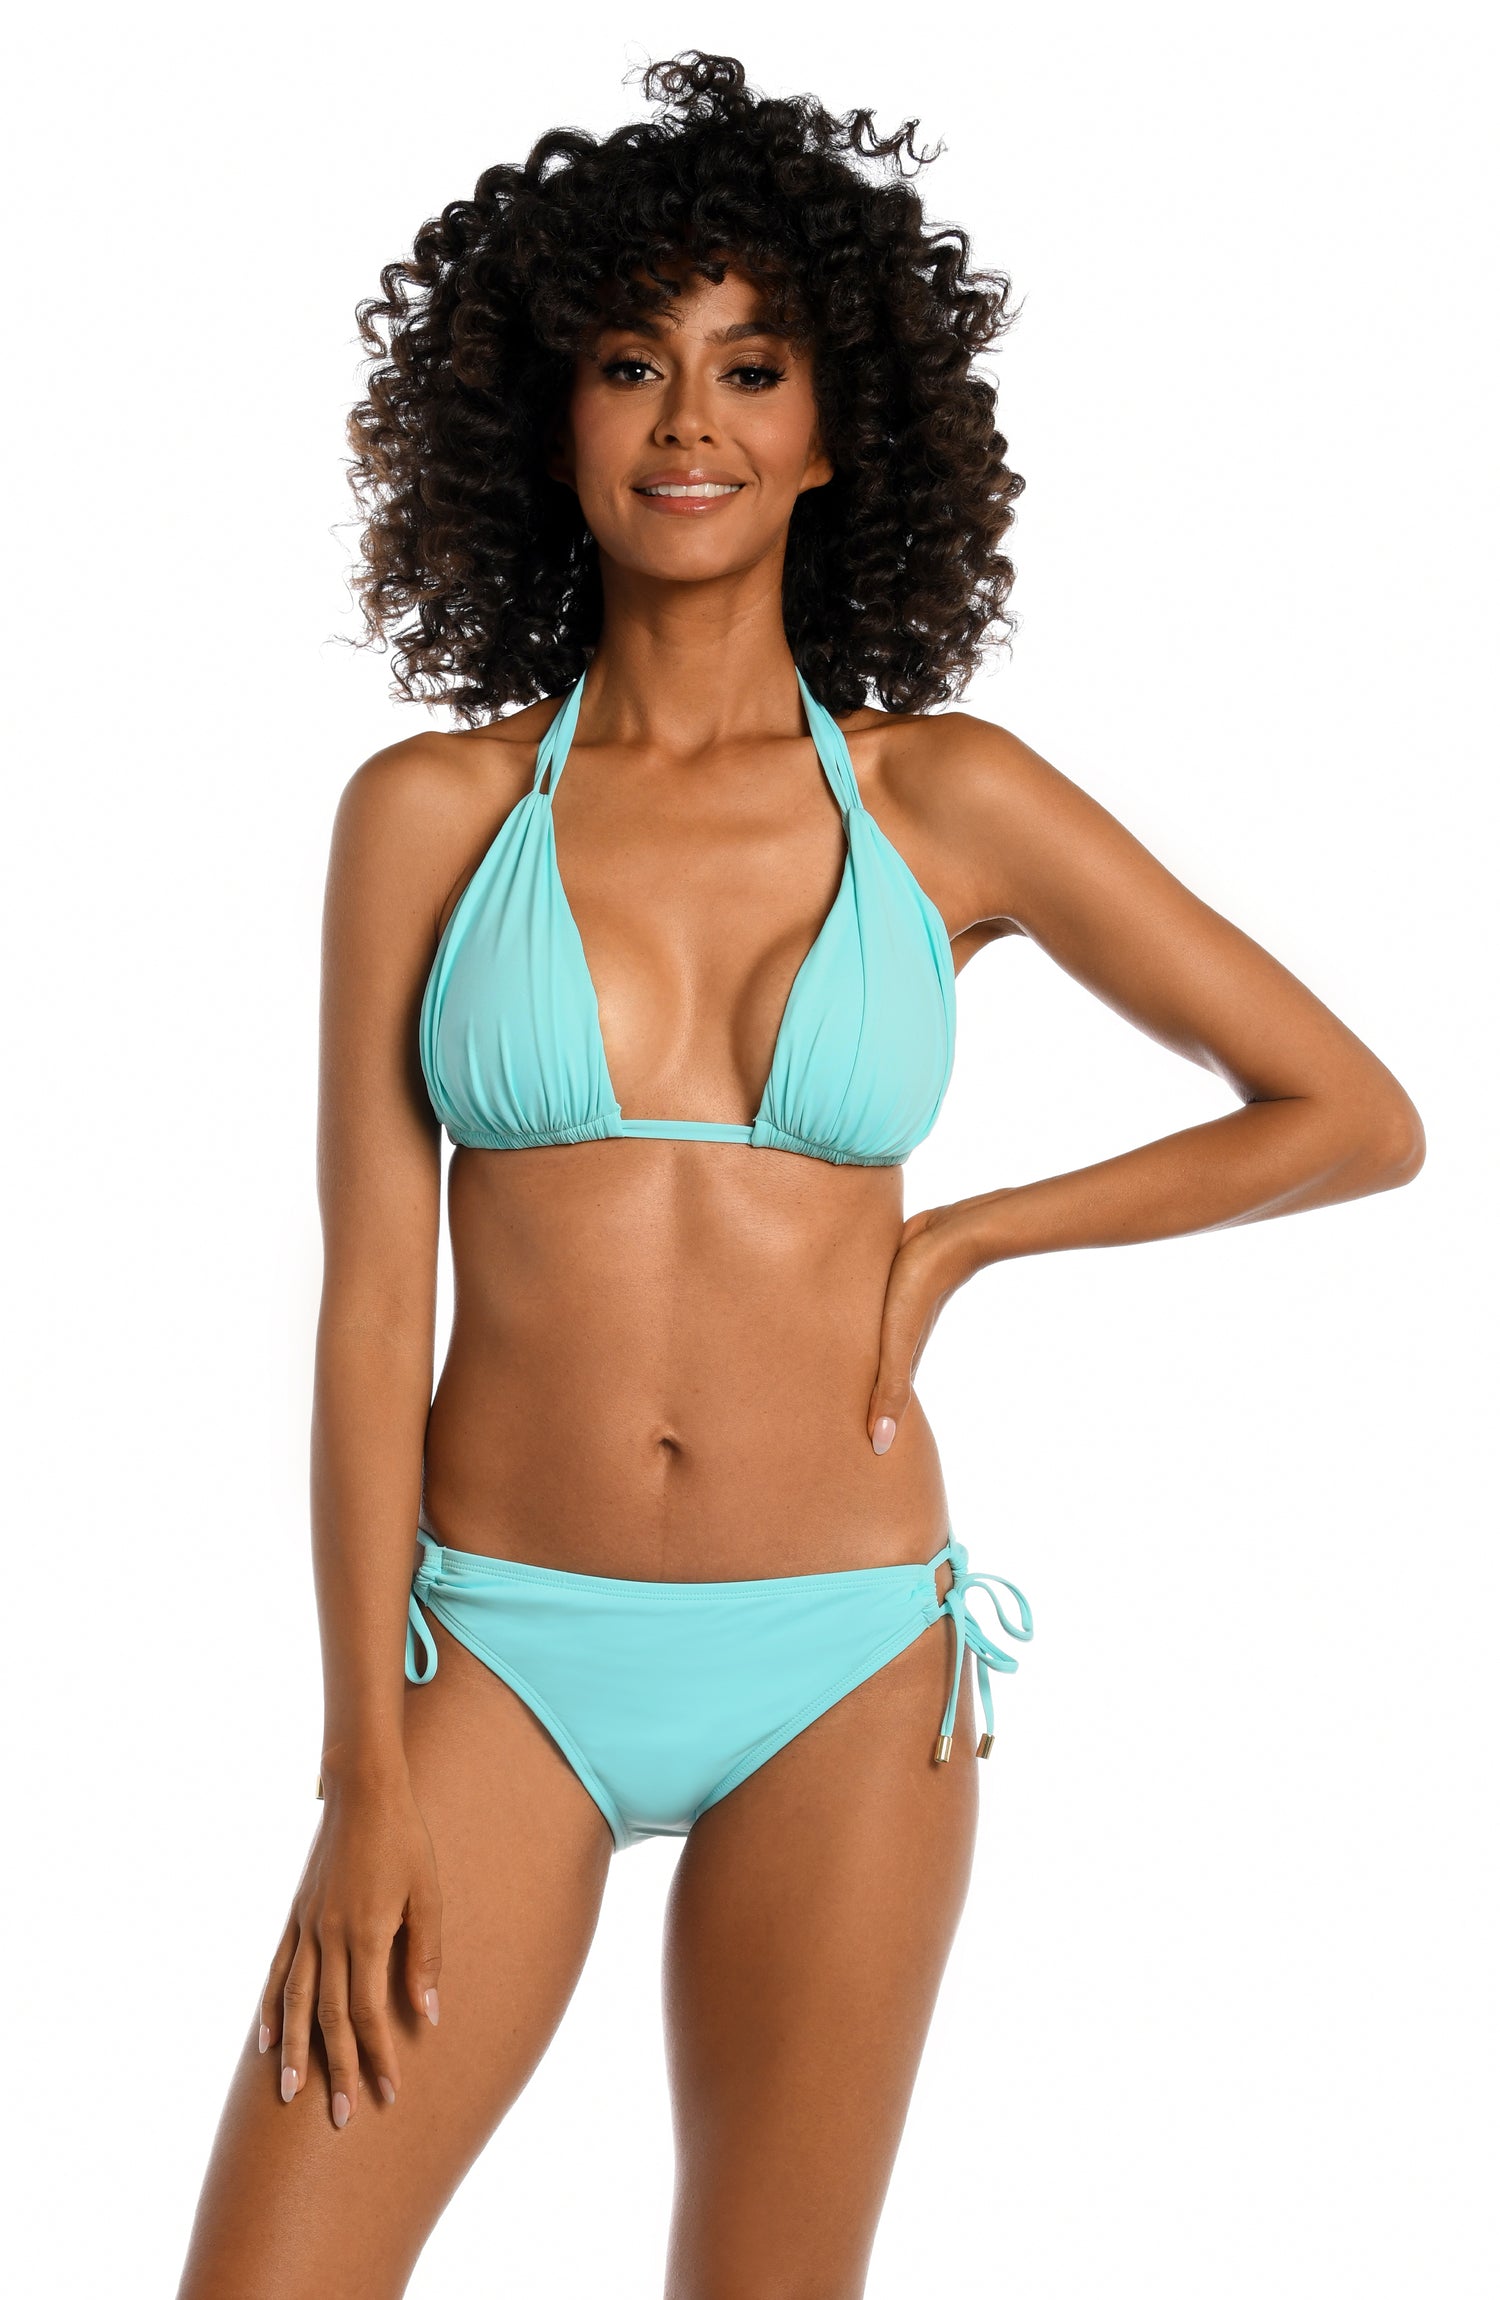 Model is wearing a ice blue colored halter swimsuit top from our Best-Selling Island Goddess collection.